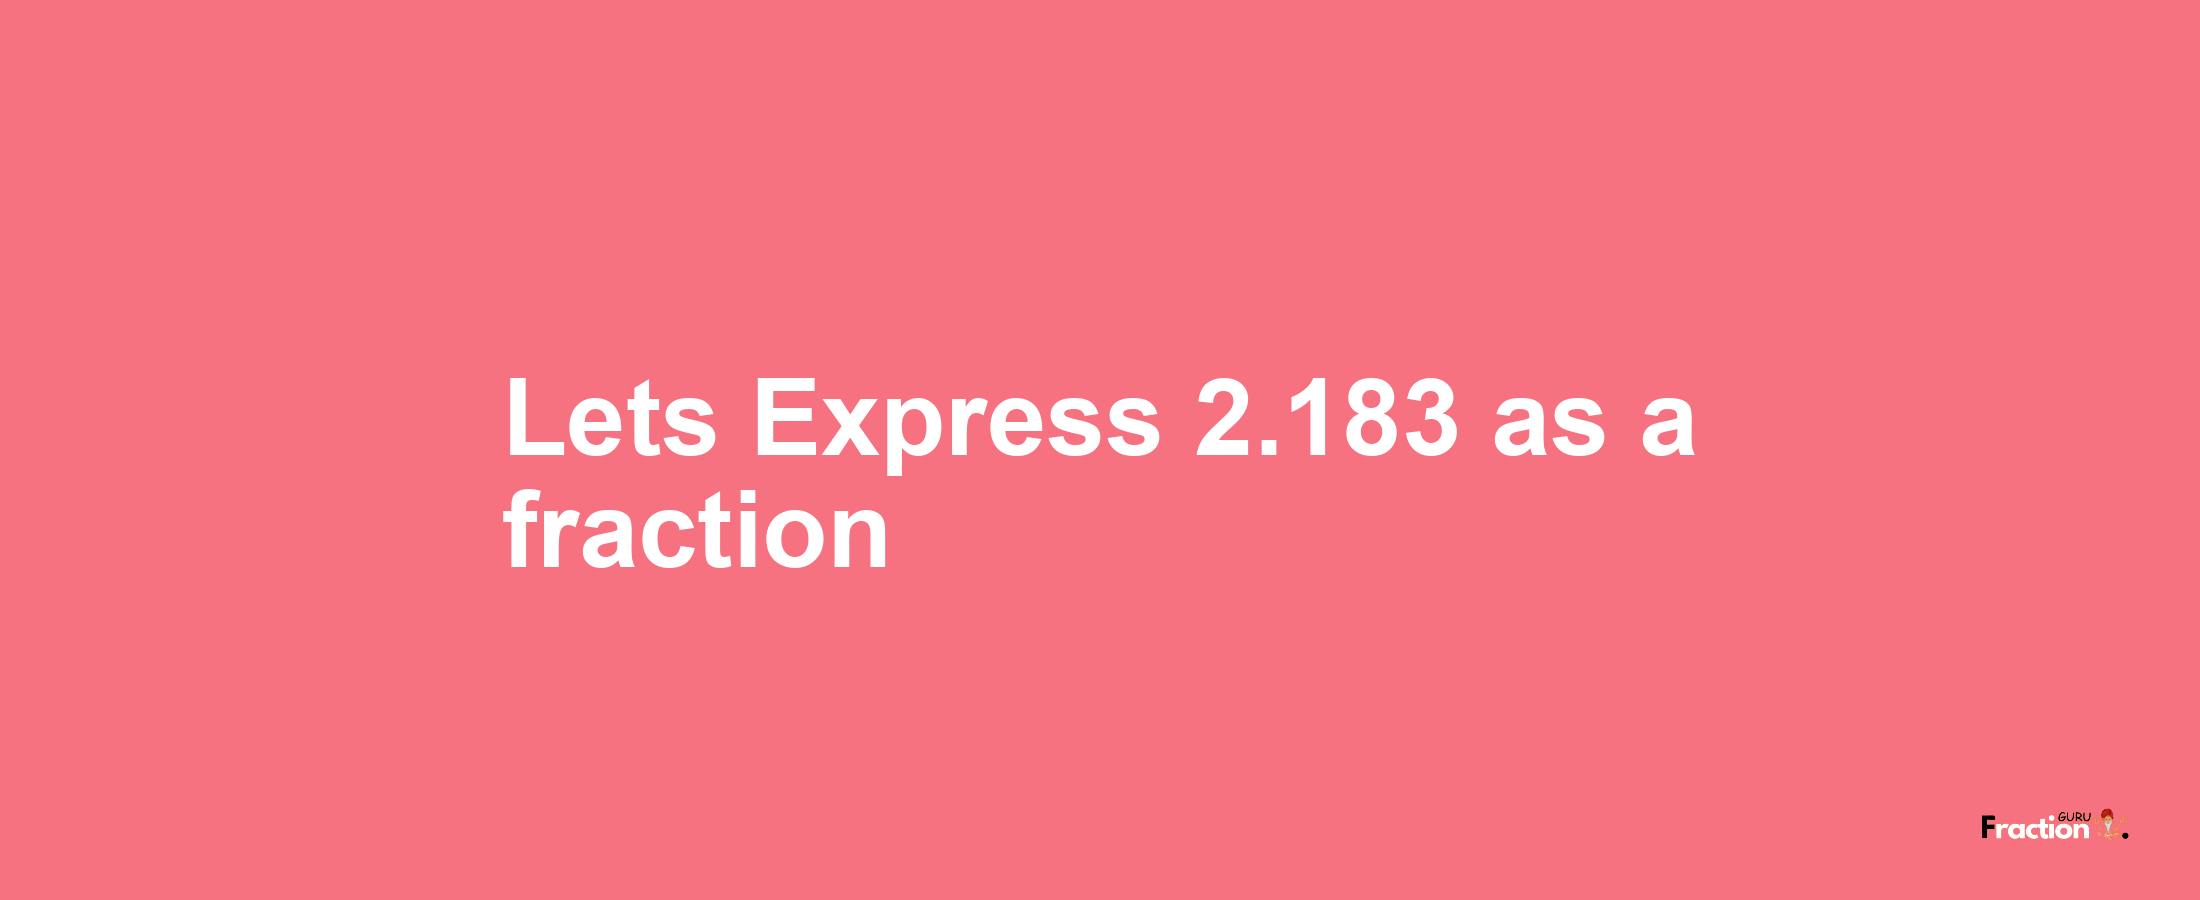 Lets Express 2.183 as afraction